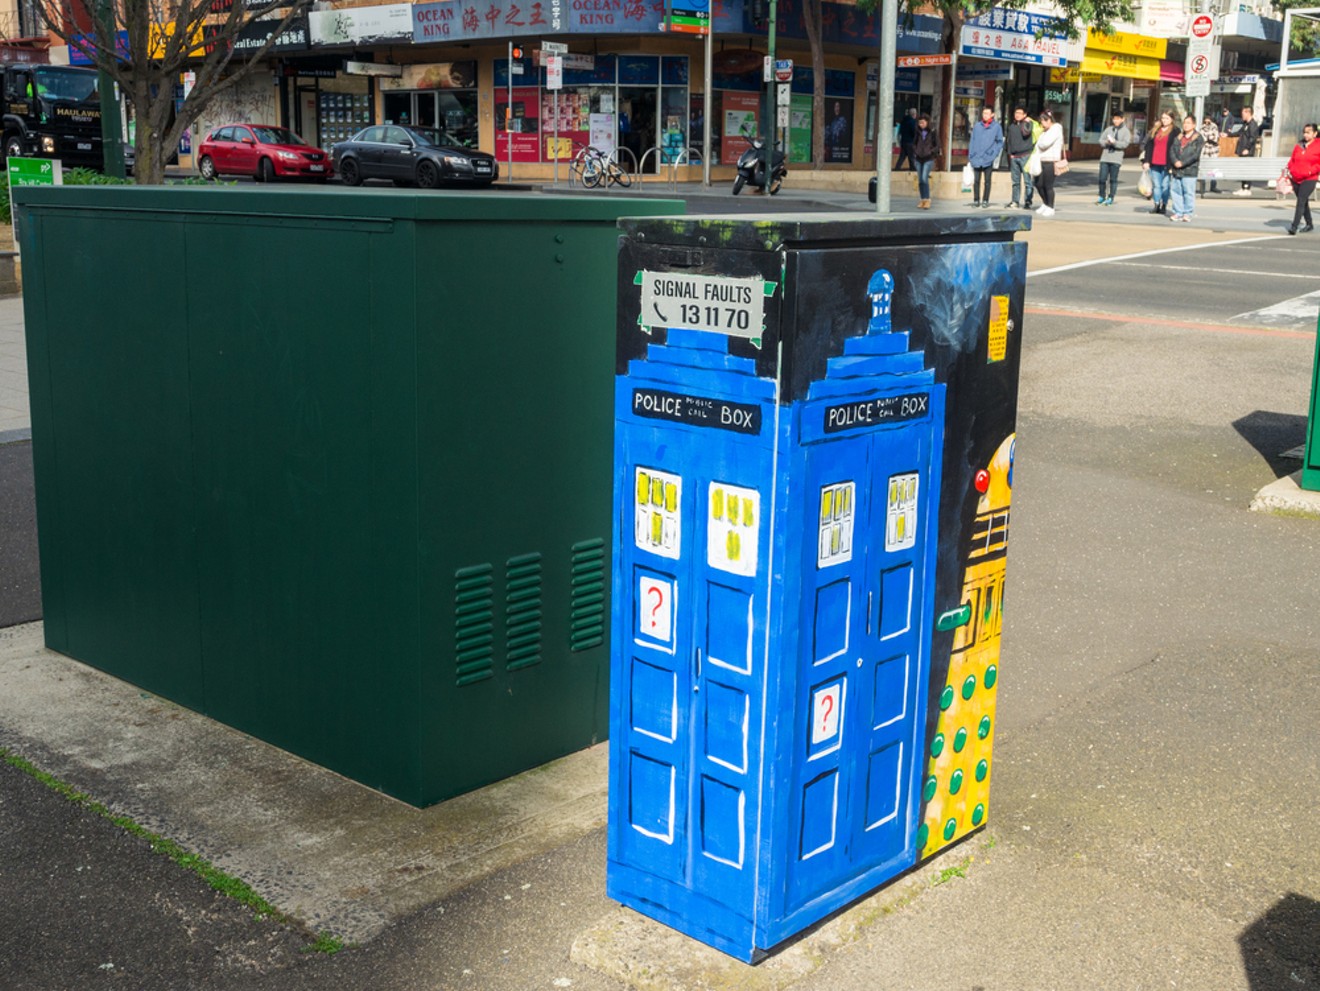 A painted traffic signal box in Melbourne, Australia.